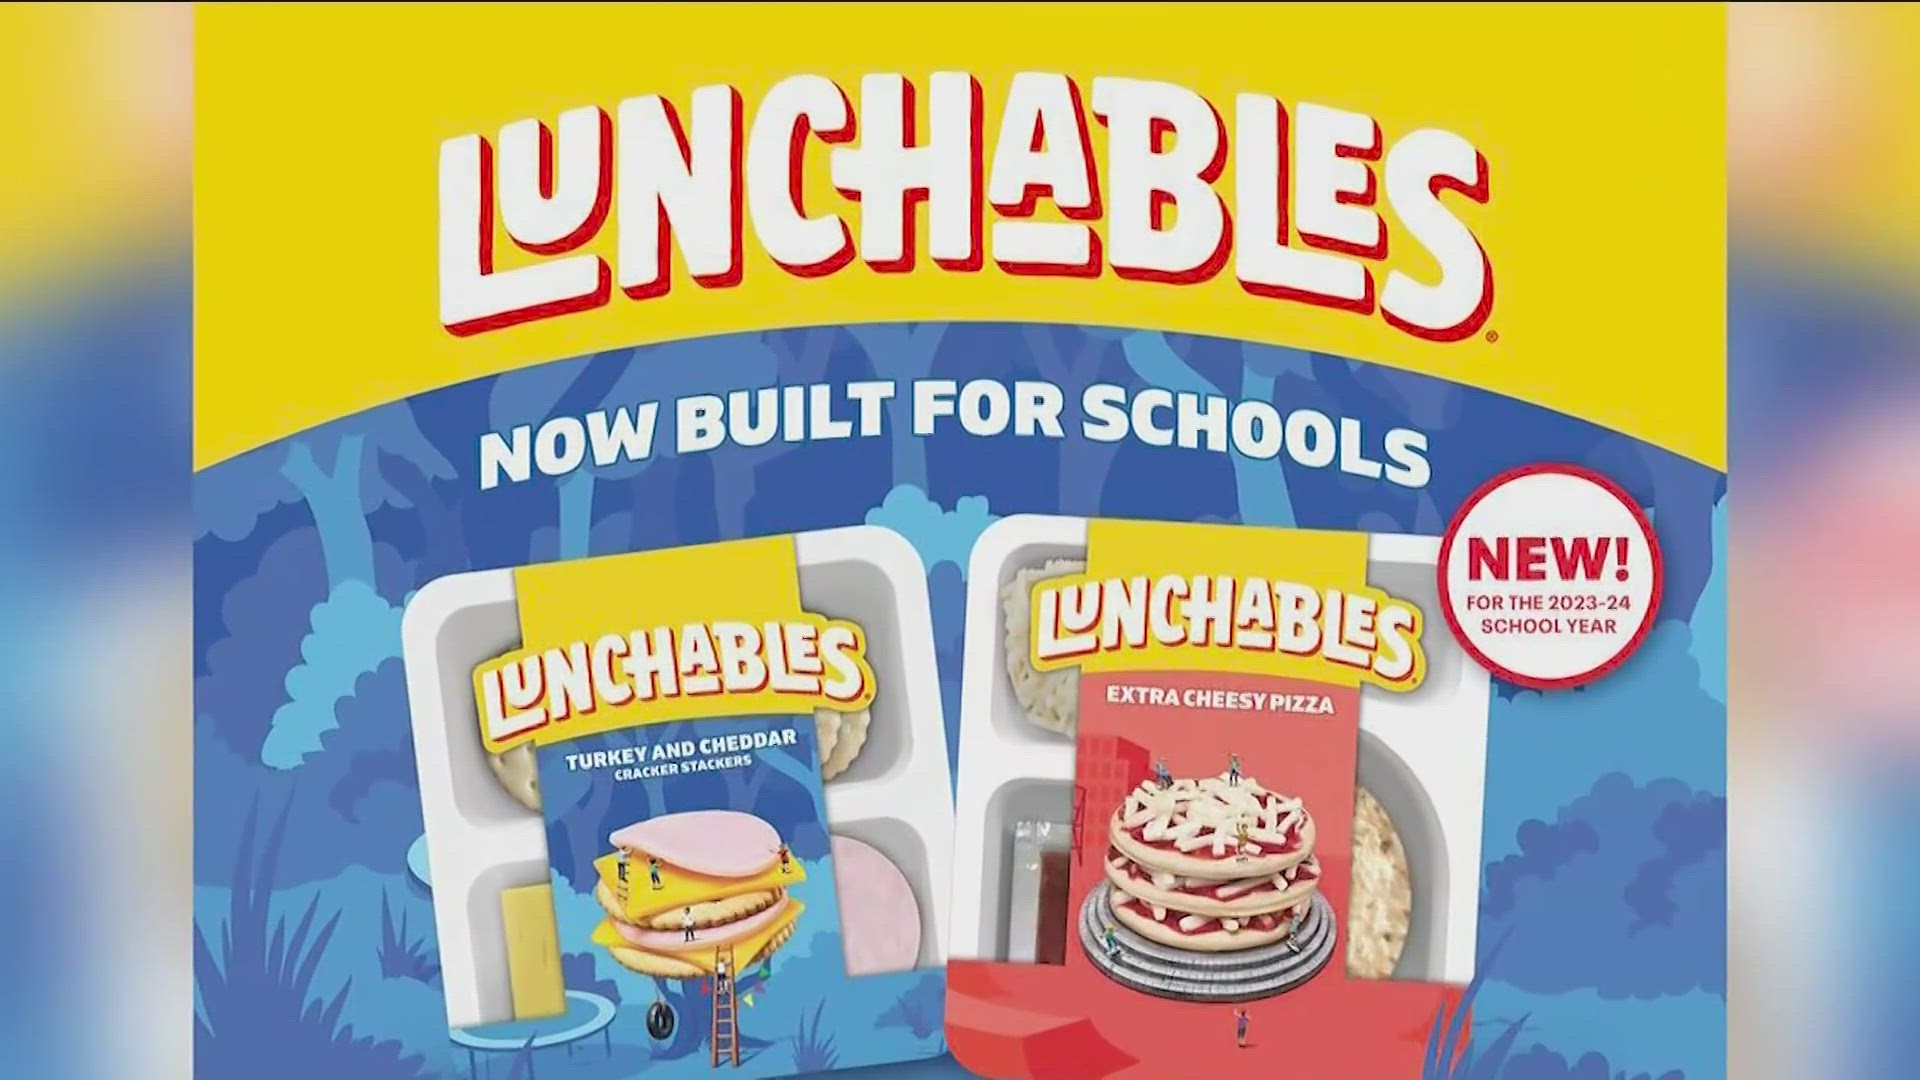 The company behind Lunchables said two new varieties will be in cafeterias this fall.